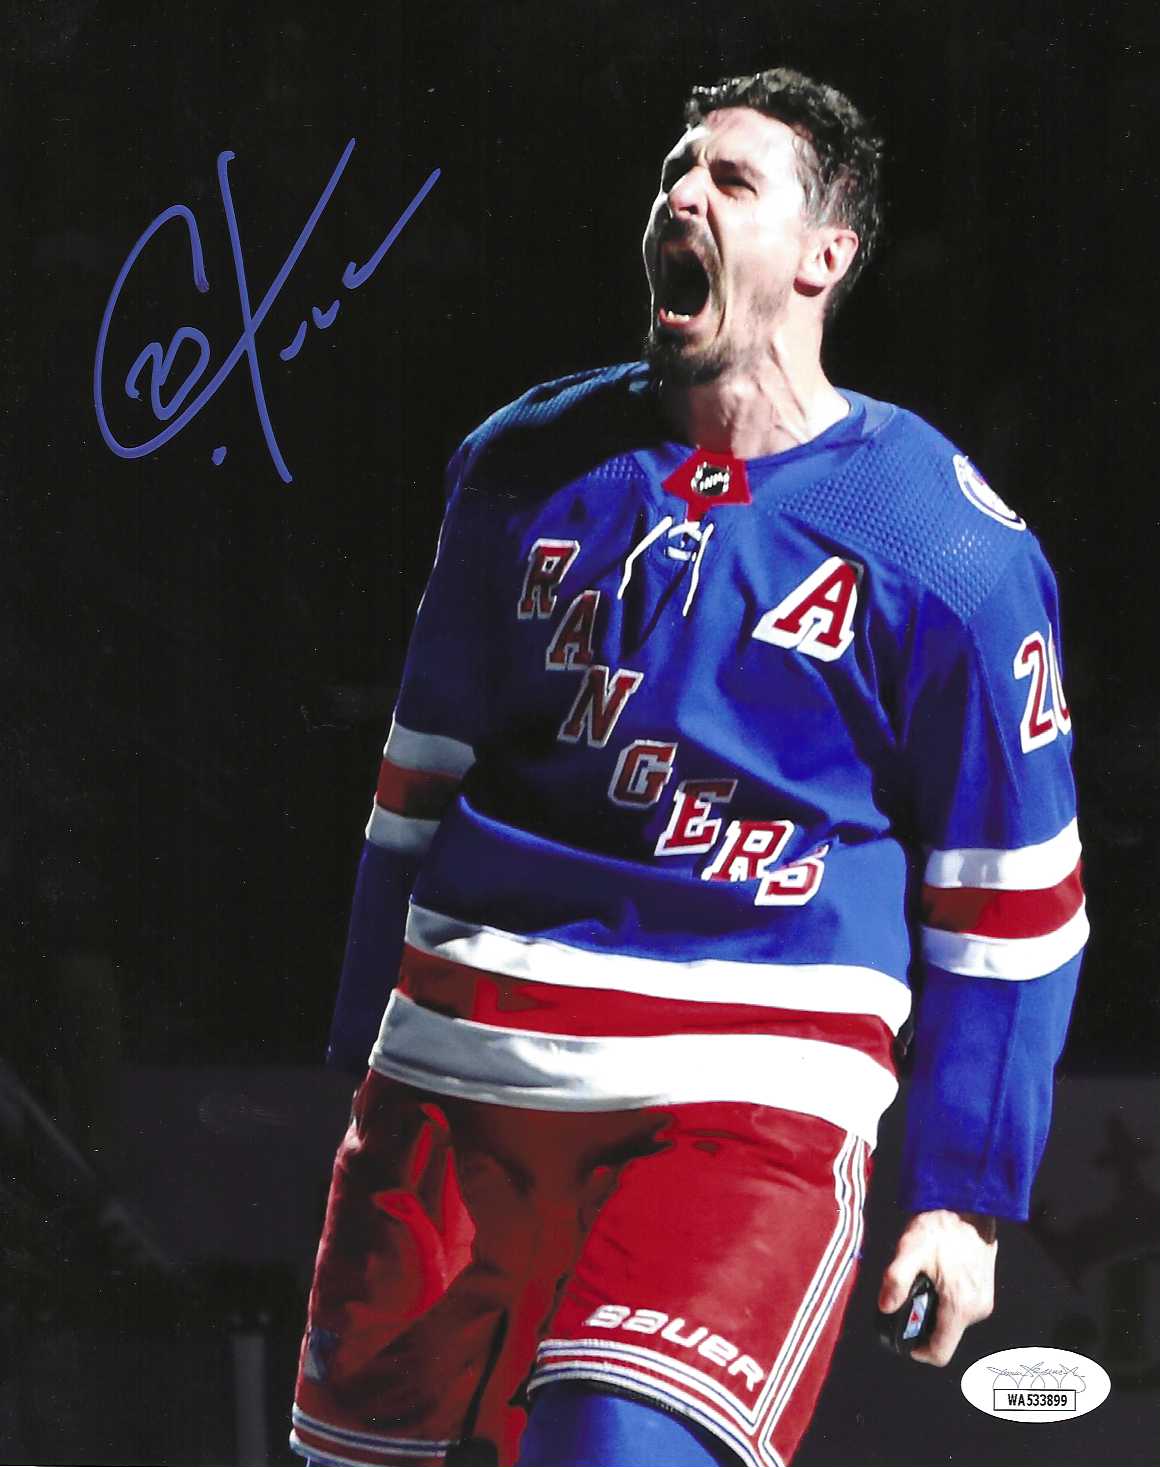 New York Rangers Brian Leetch Jersey Retirement Ceremony, Autographed 8x10  photo picture